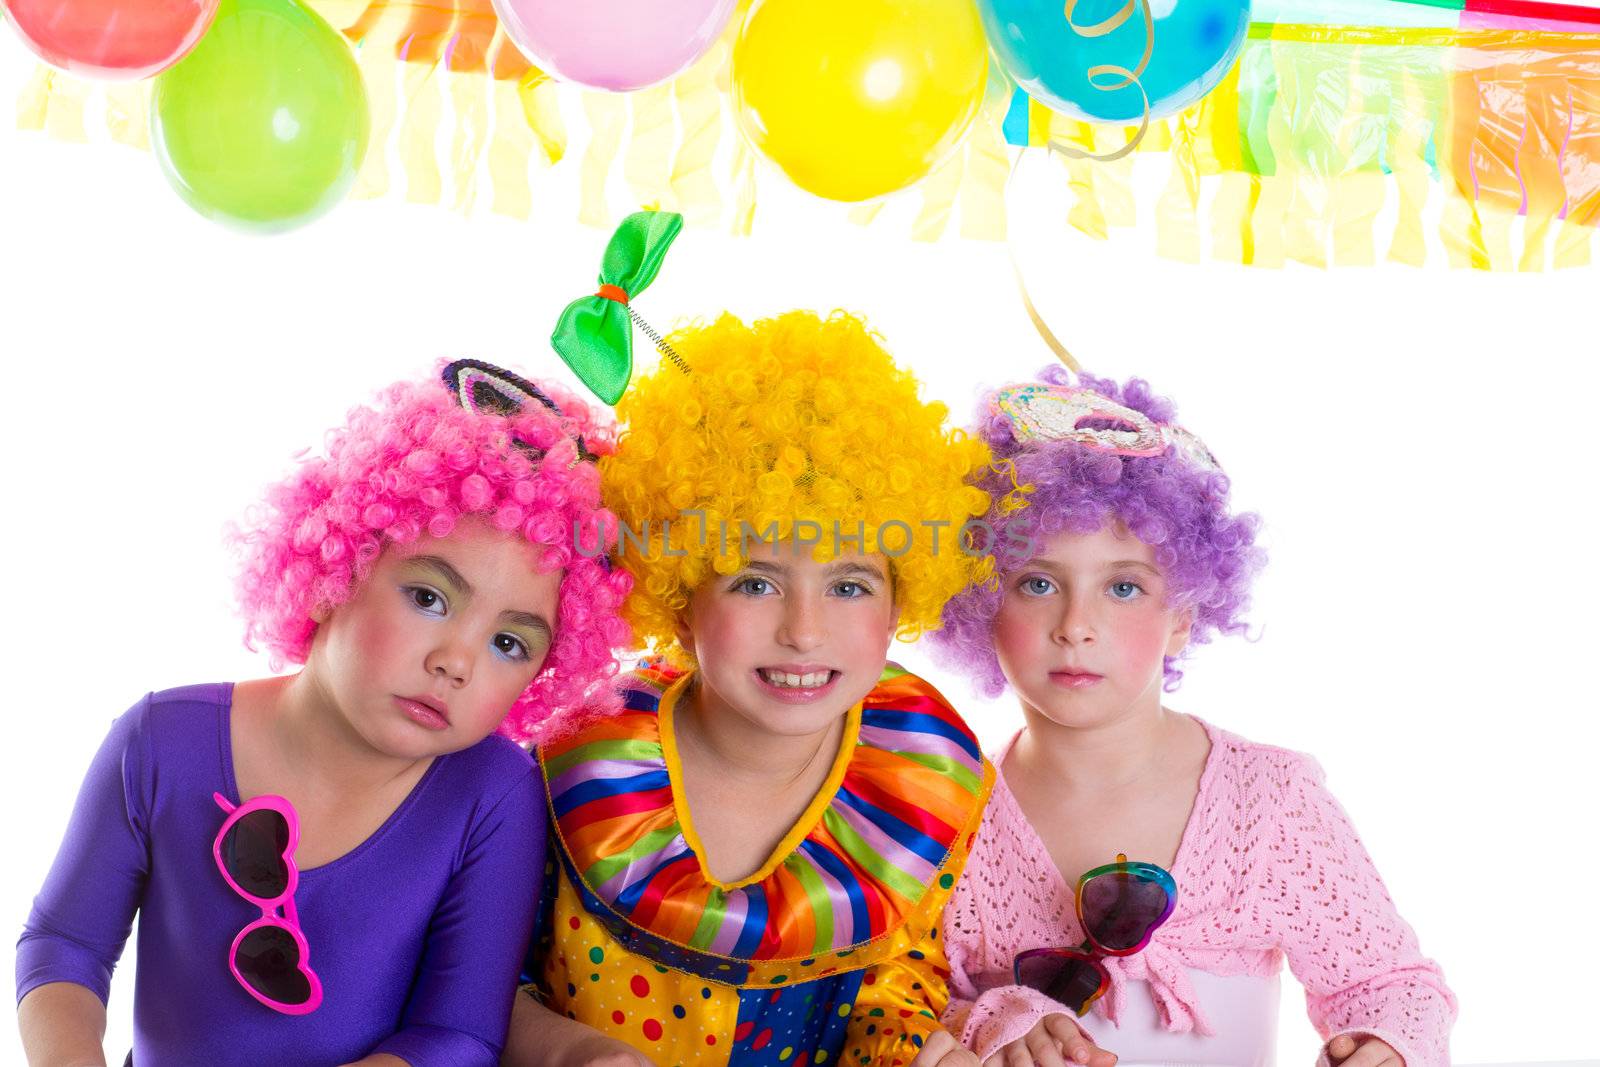 Children happy birthday party with clown wigs colorful holiday celebration